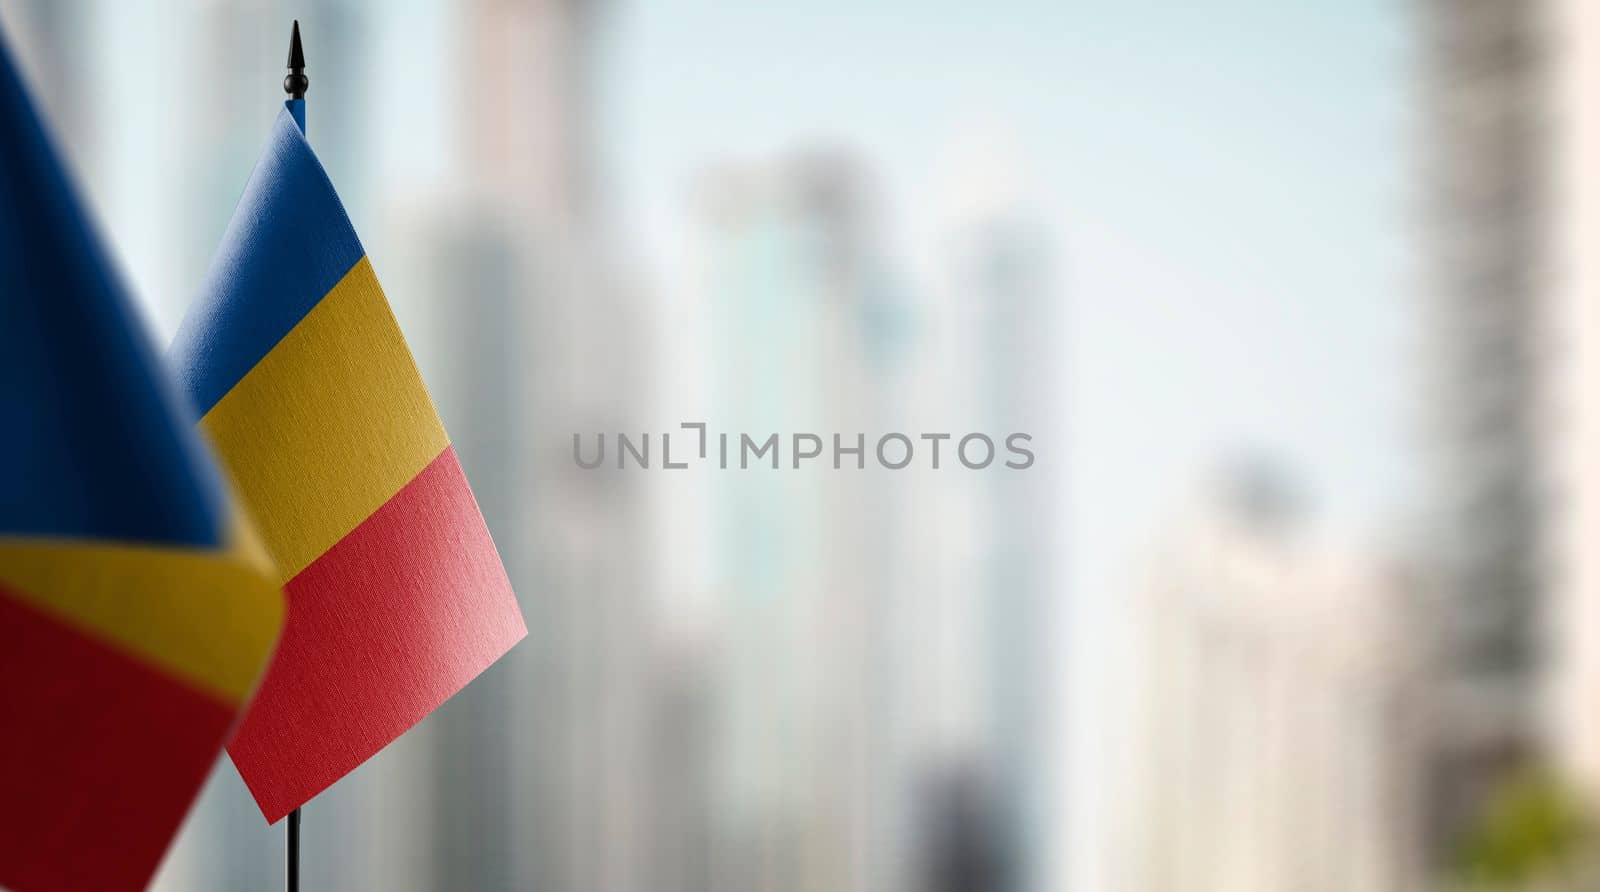 Small flags of the Chad on an abstract blurry background.